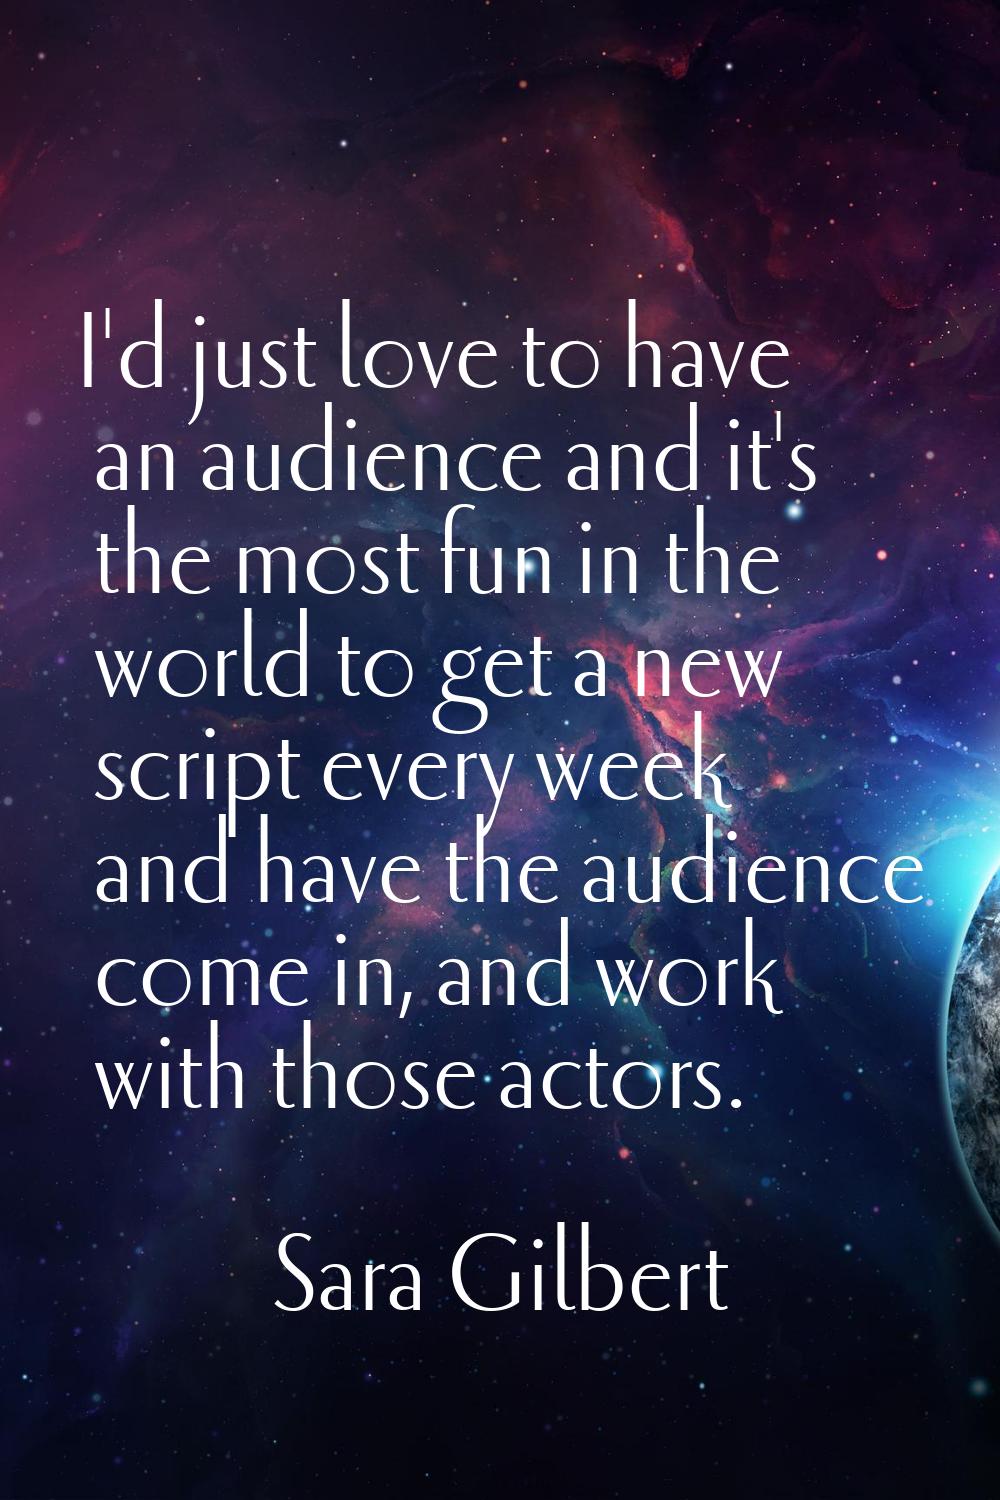 I'd just love to have an audience and it's the most fun in the world to get a new script every week